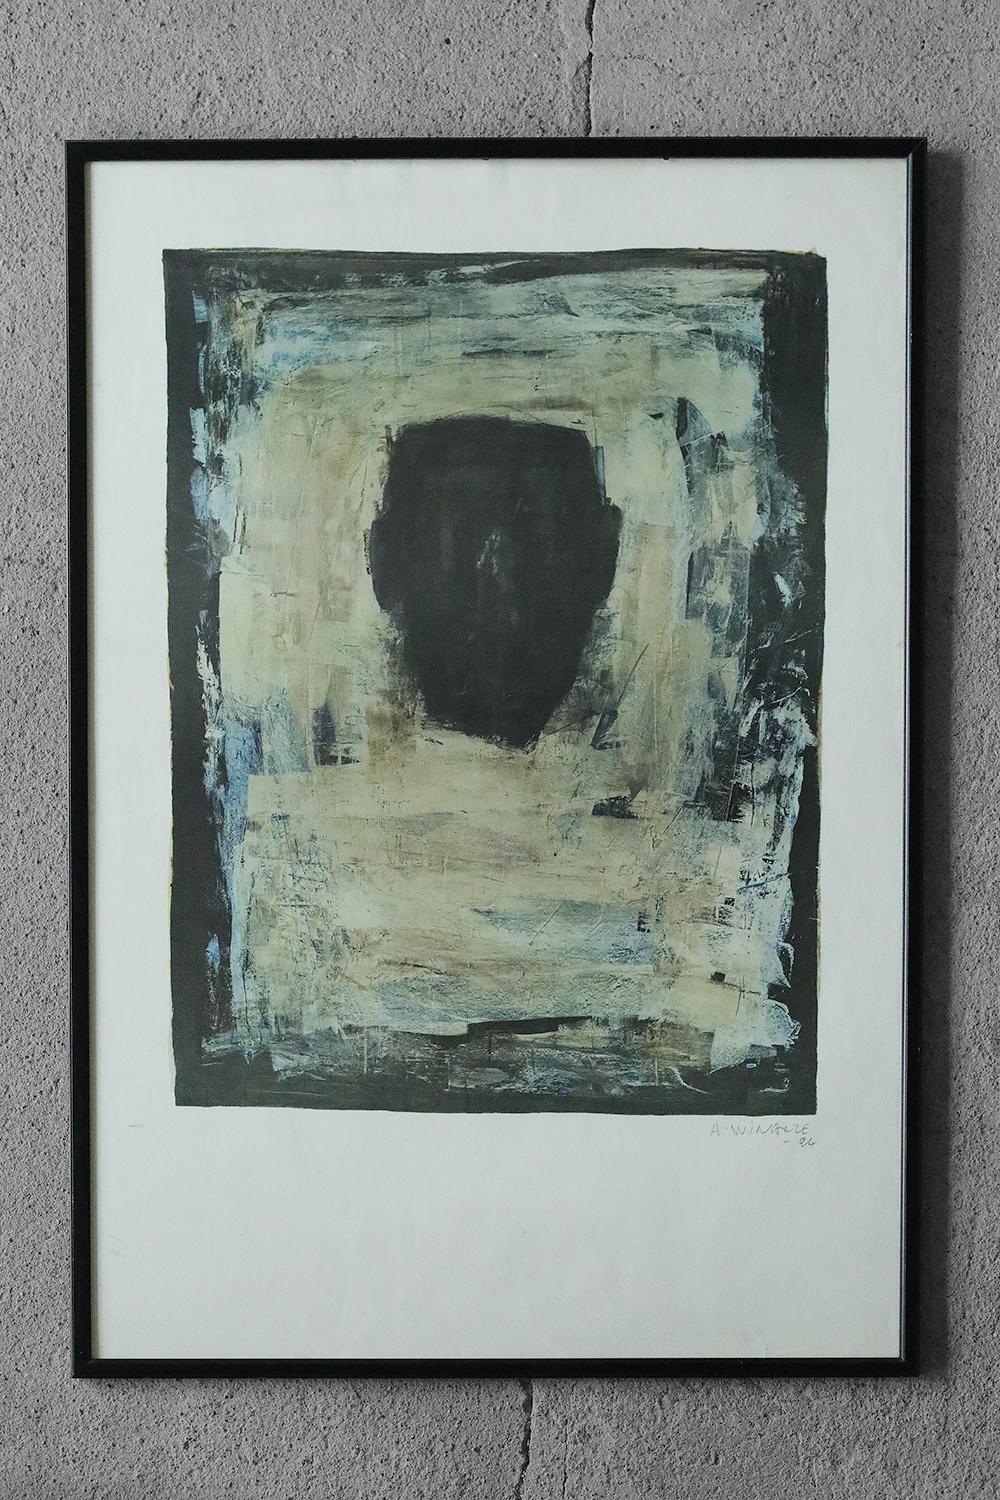 Alain Winance, Composition, 1994
Color lithograph
The work is signed by the artist and dated (pencil)
Work dimensions 98/67
The work is framed

Alain Winance is a Belgian artist born in 1946. He studied at the Beaux-Arts in Mons, where in 1973 he